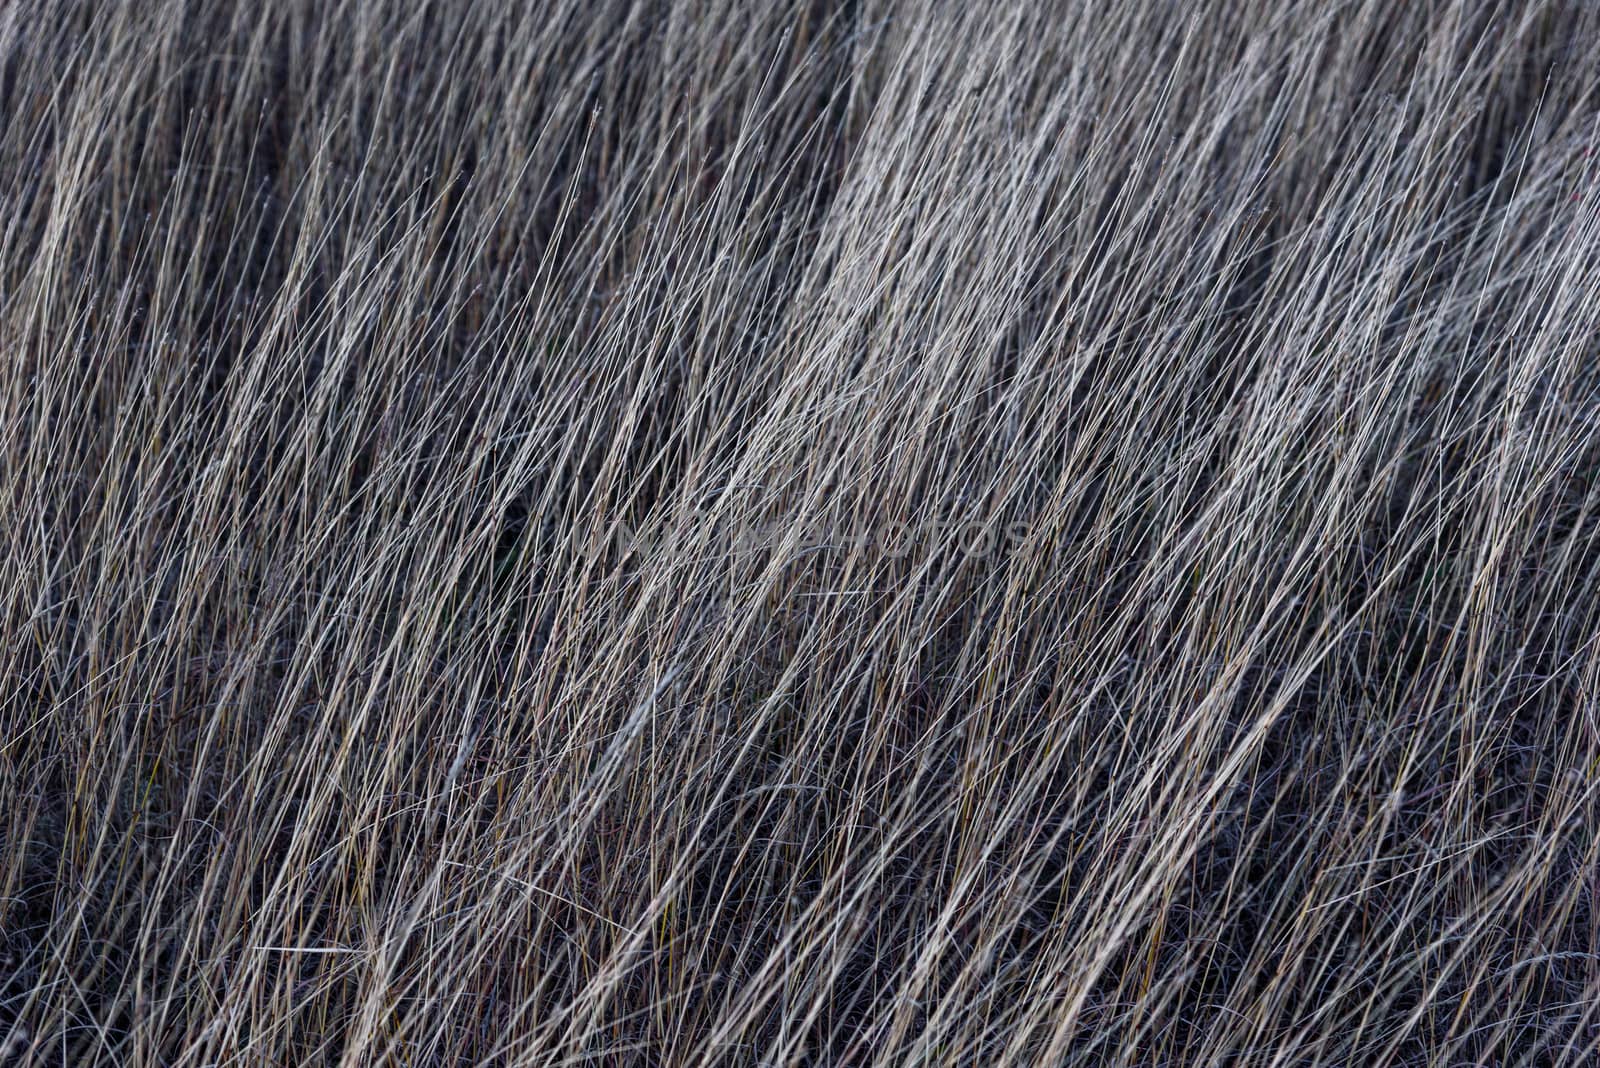 Dry grass texture background